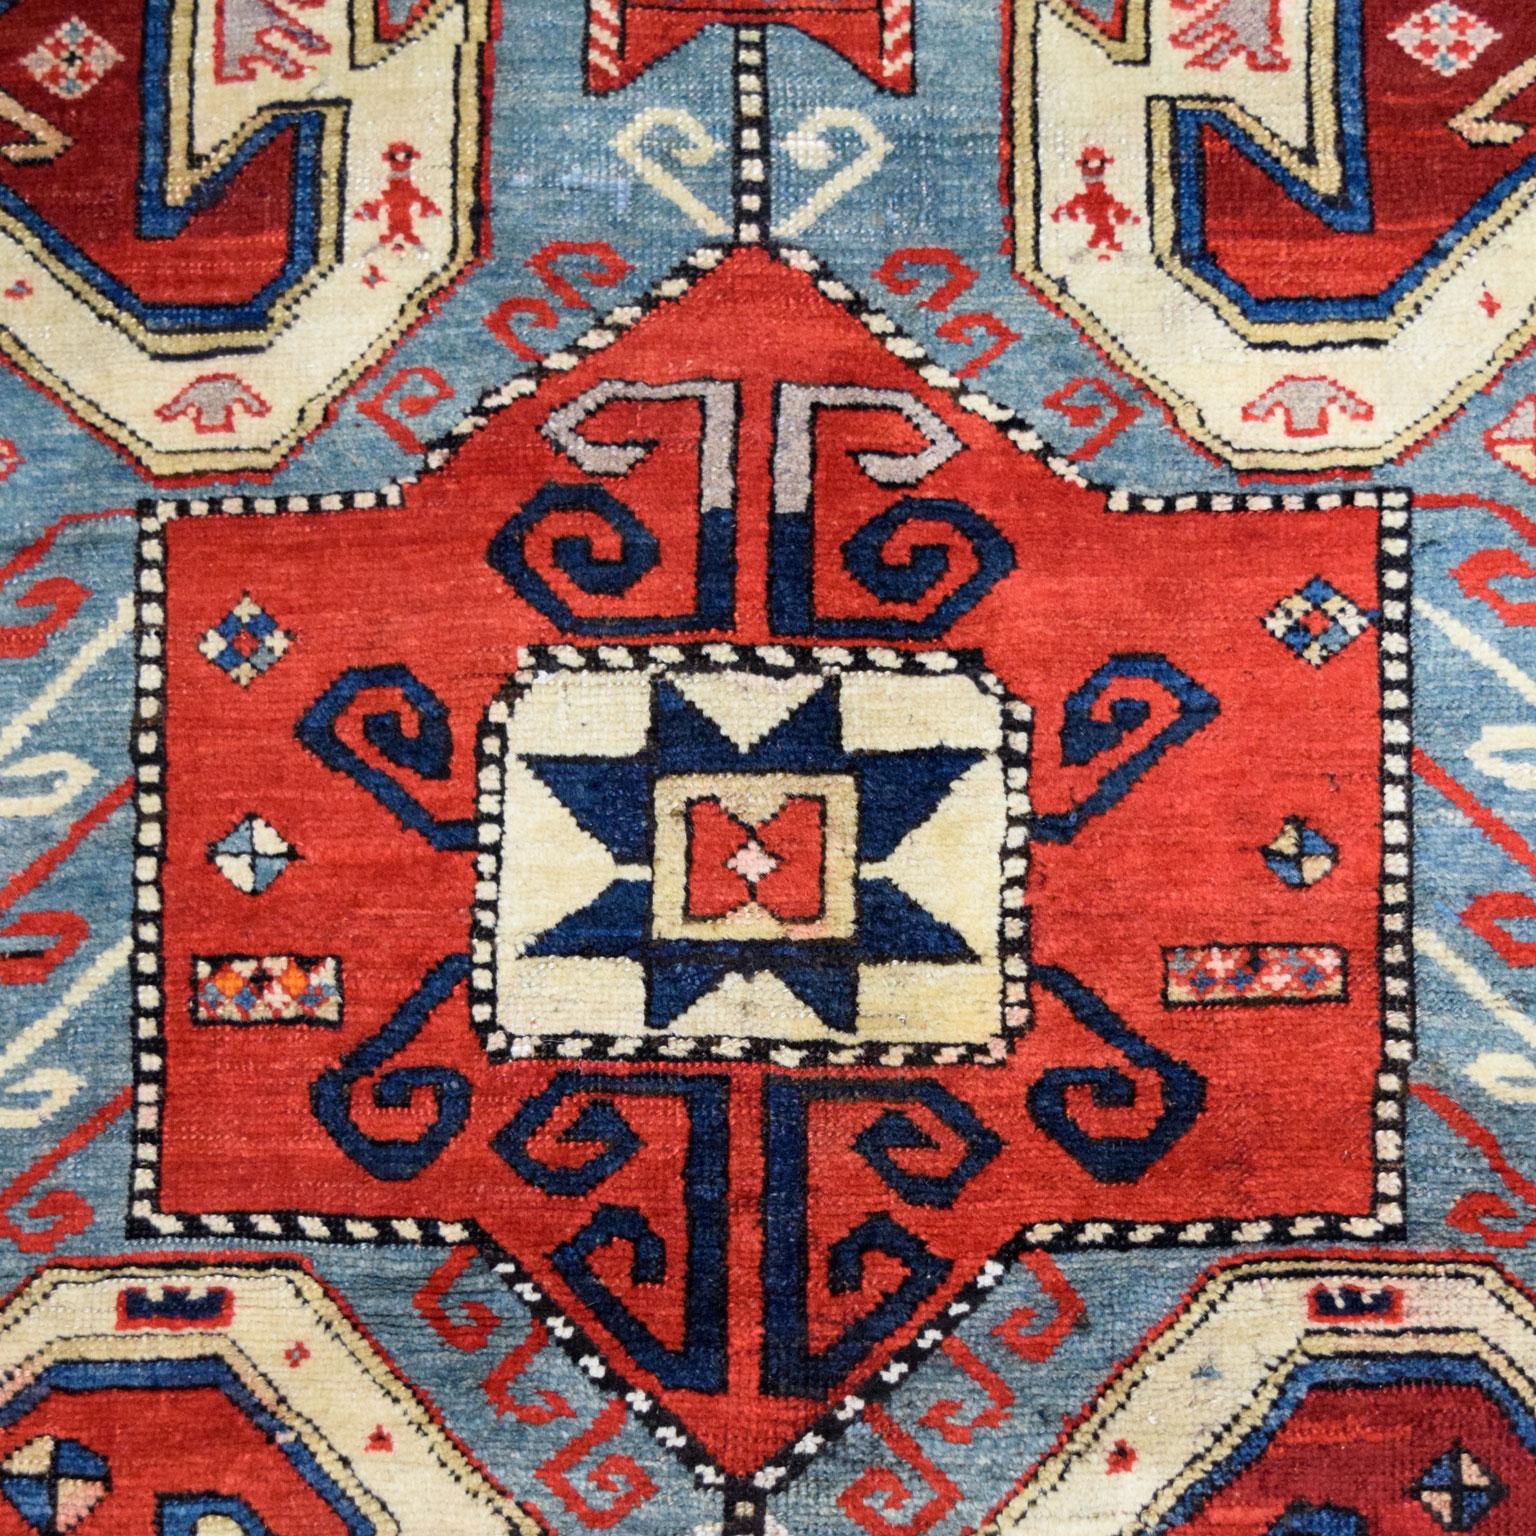 Hand-knotted in Iran, this blue, red, and cream Persian Kazak carpet measures 5’2” x 6’11” and belongs to Orley Shabahang’s Antique collection. Created using traditional Persian weaving techniques, this carpet features a luxuriously soft pile and a